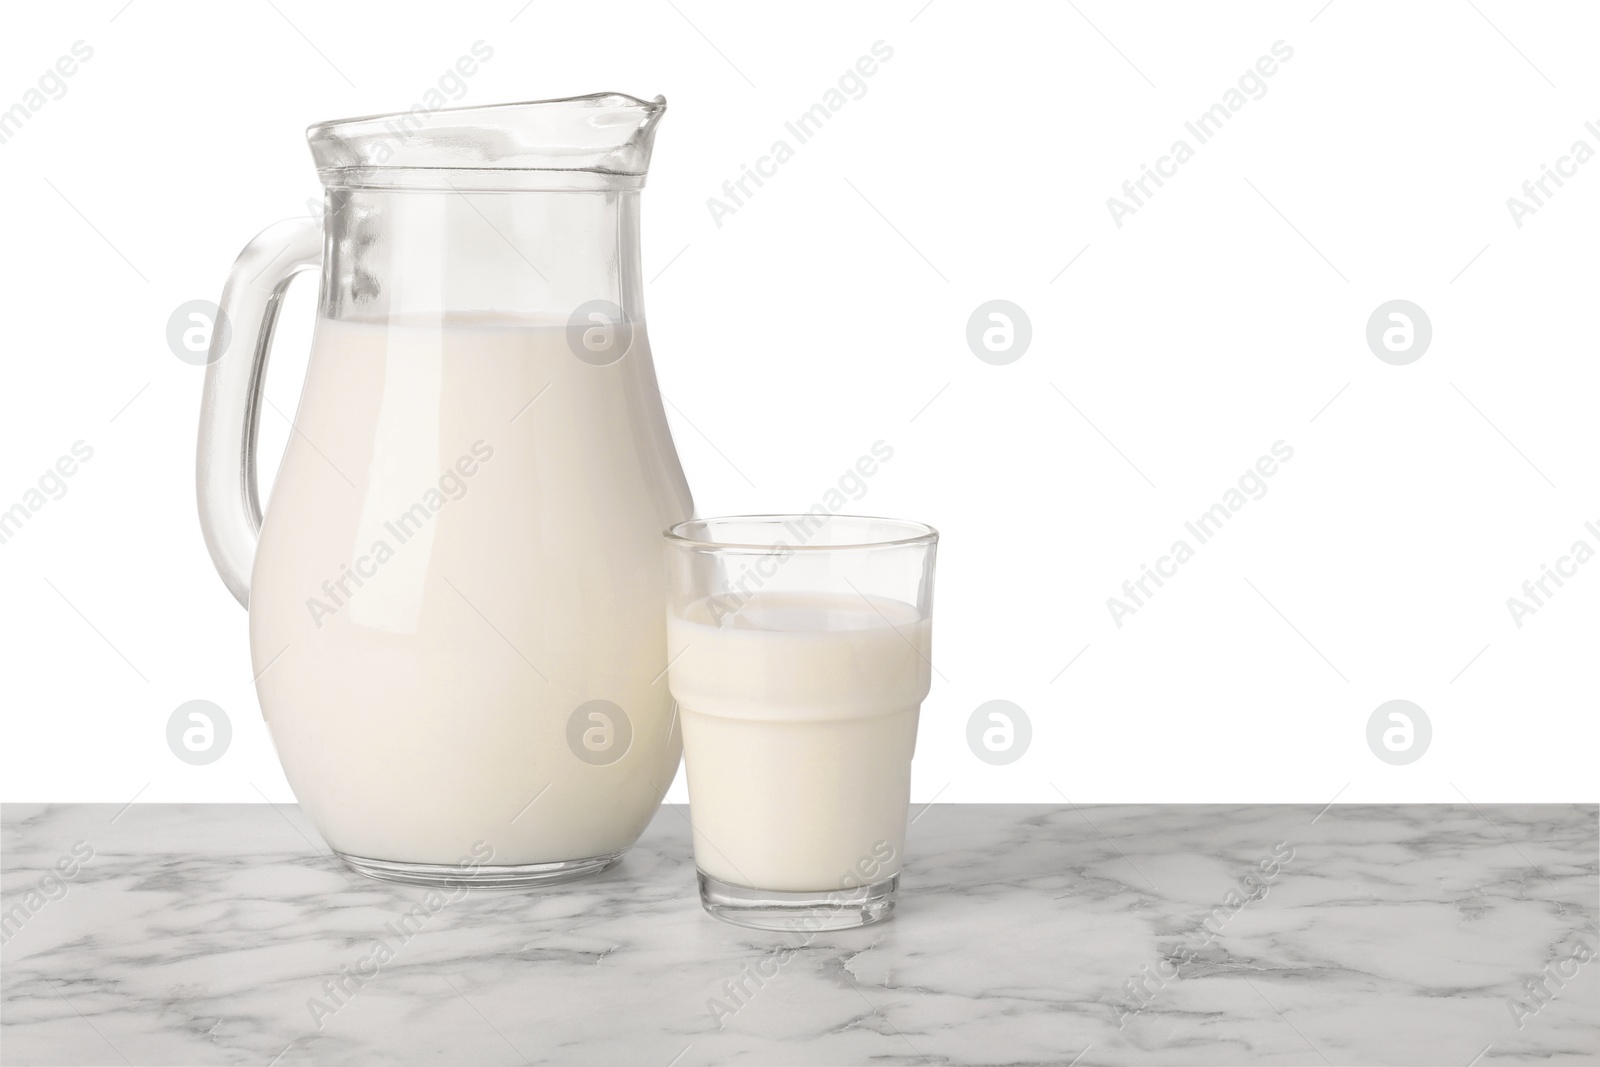 Photo of Glassware with tasty milk on marble table against white background